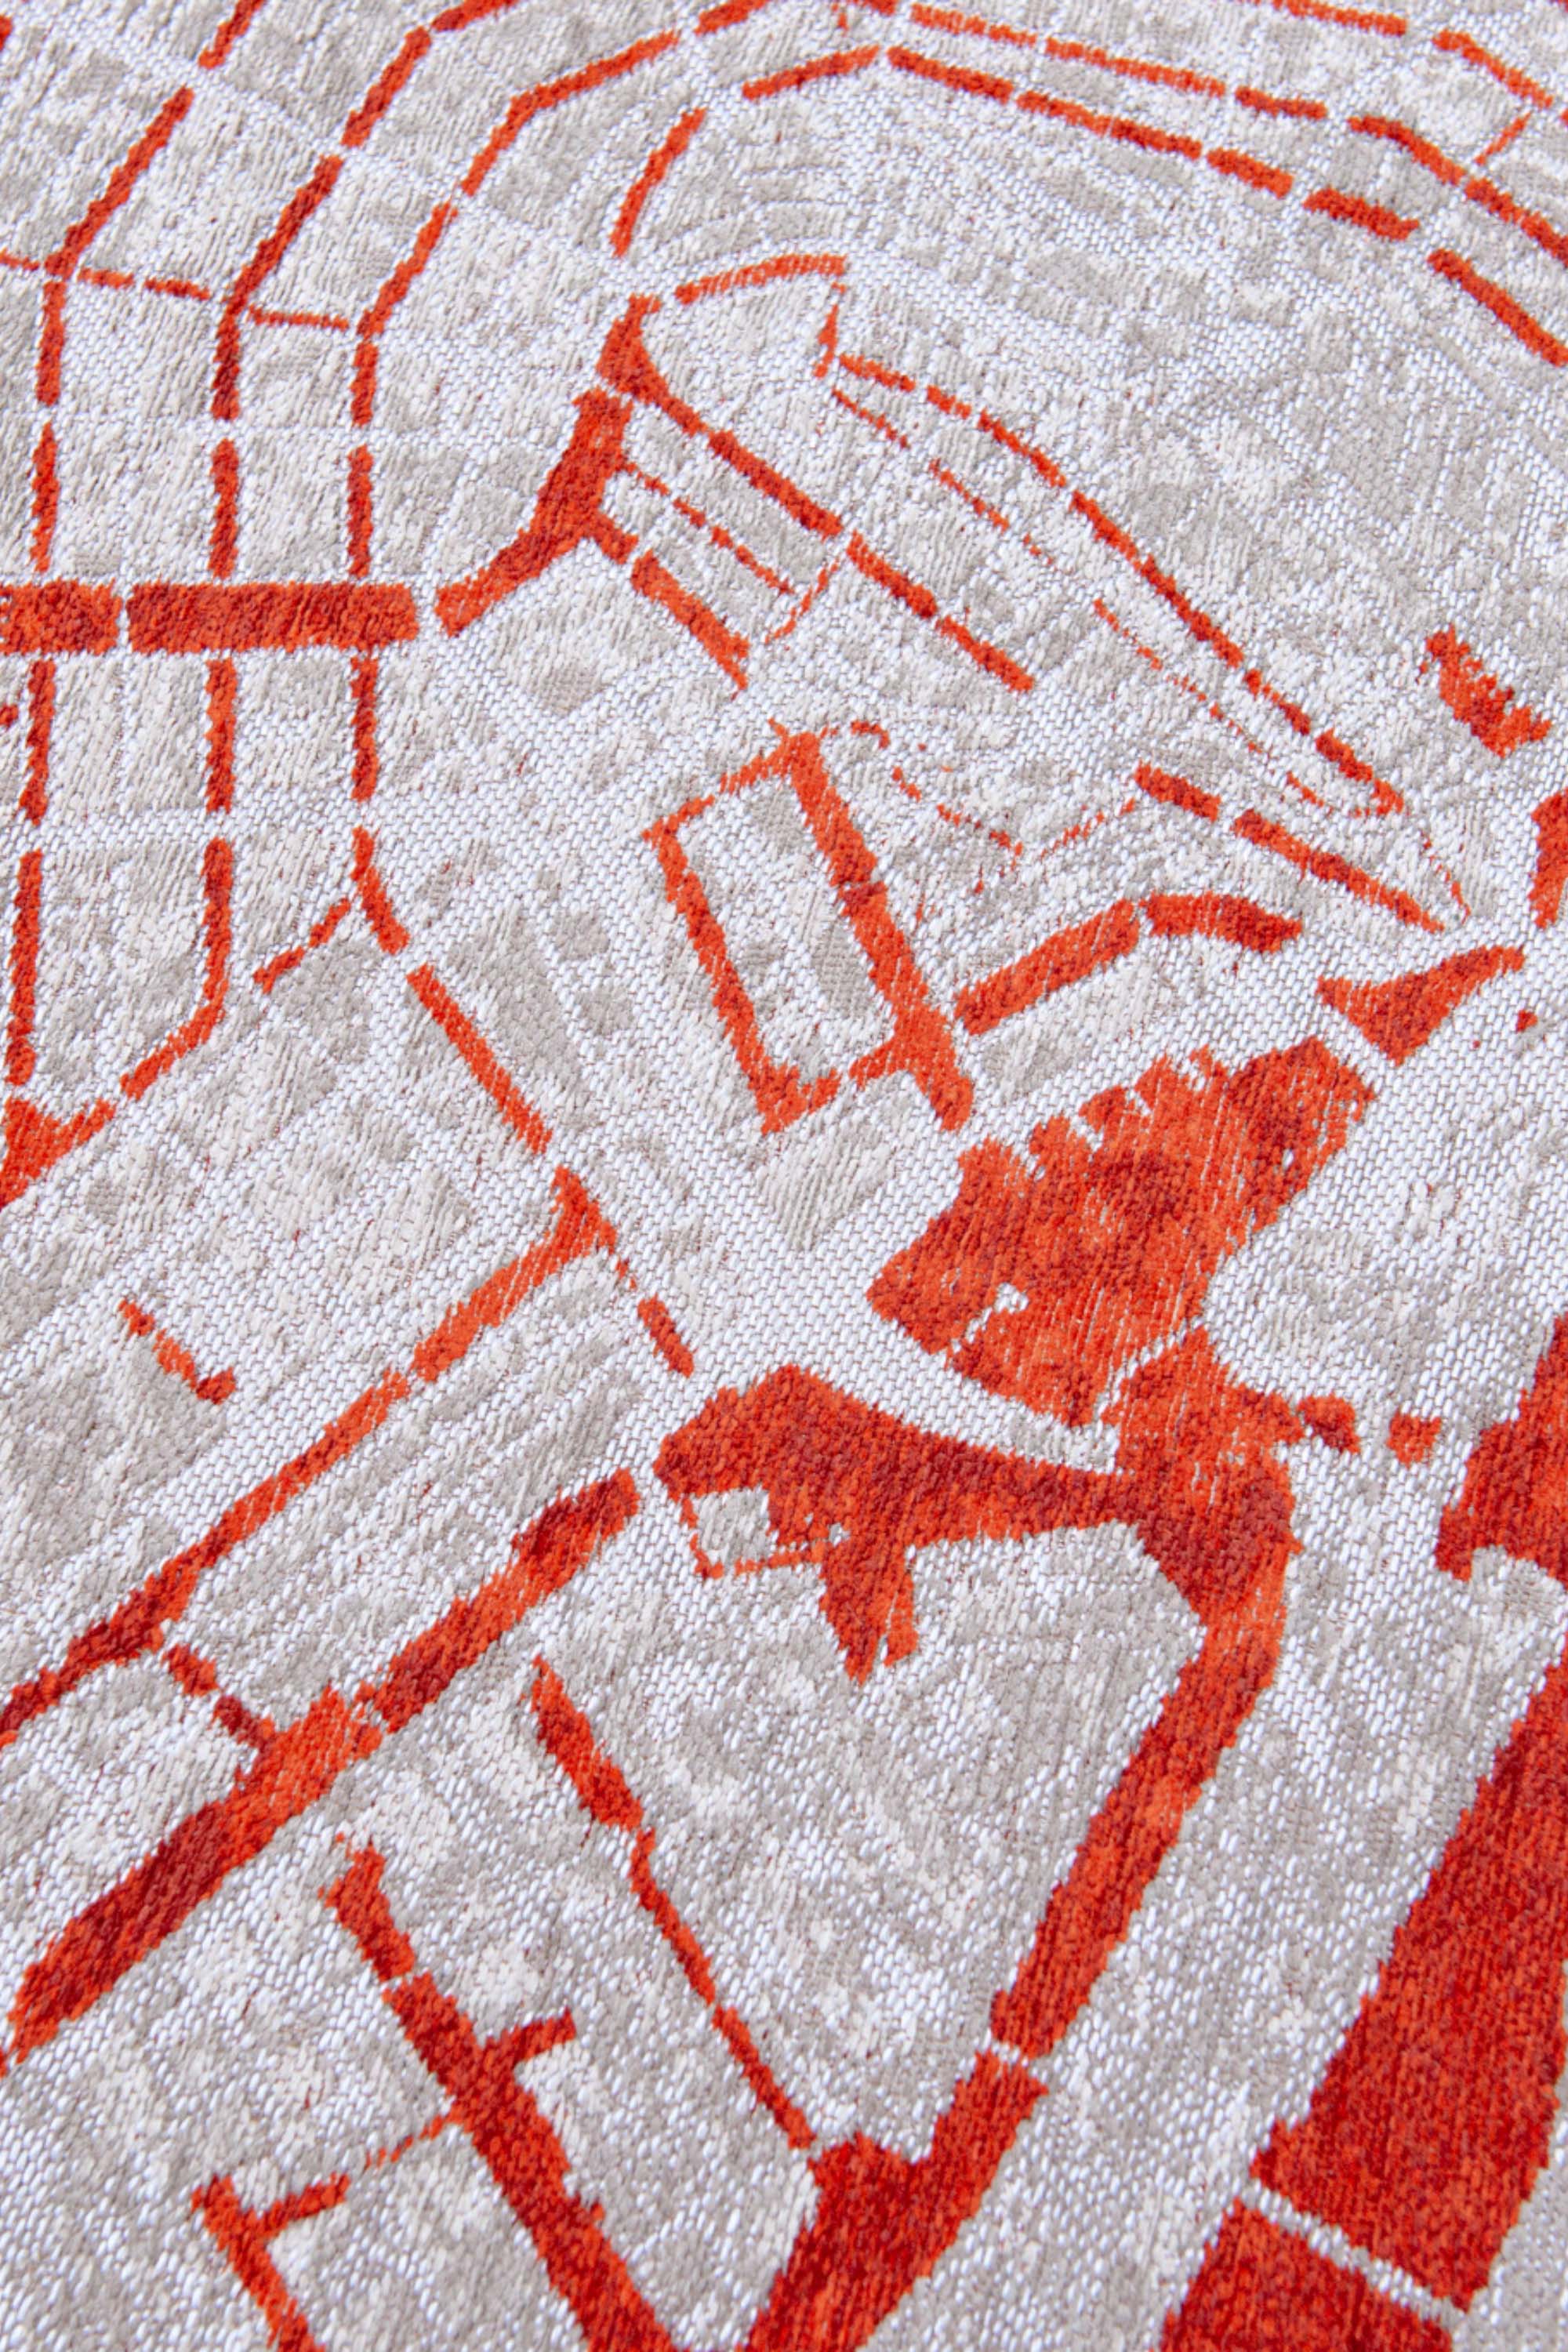 Orange and grey abstract rug with a pattern inspired by the map of Amsterdamn